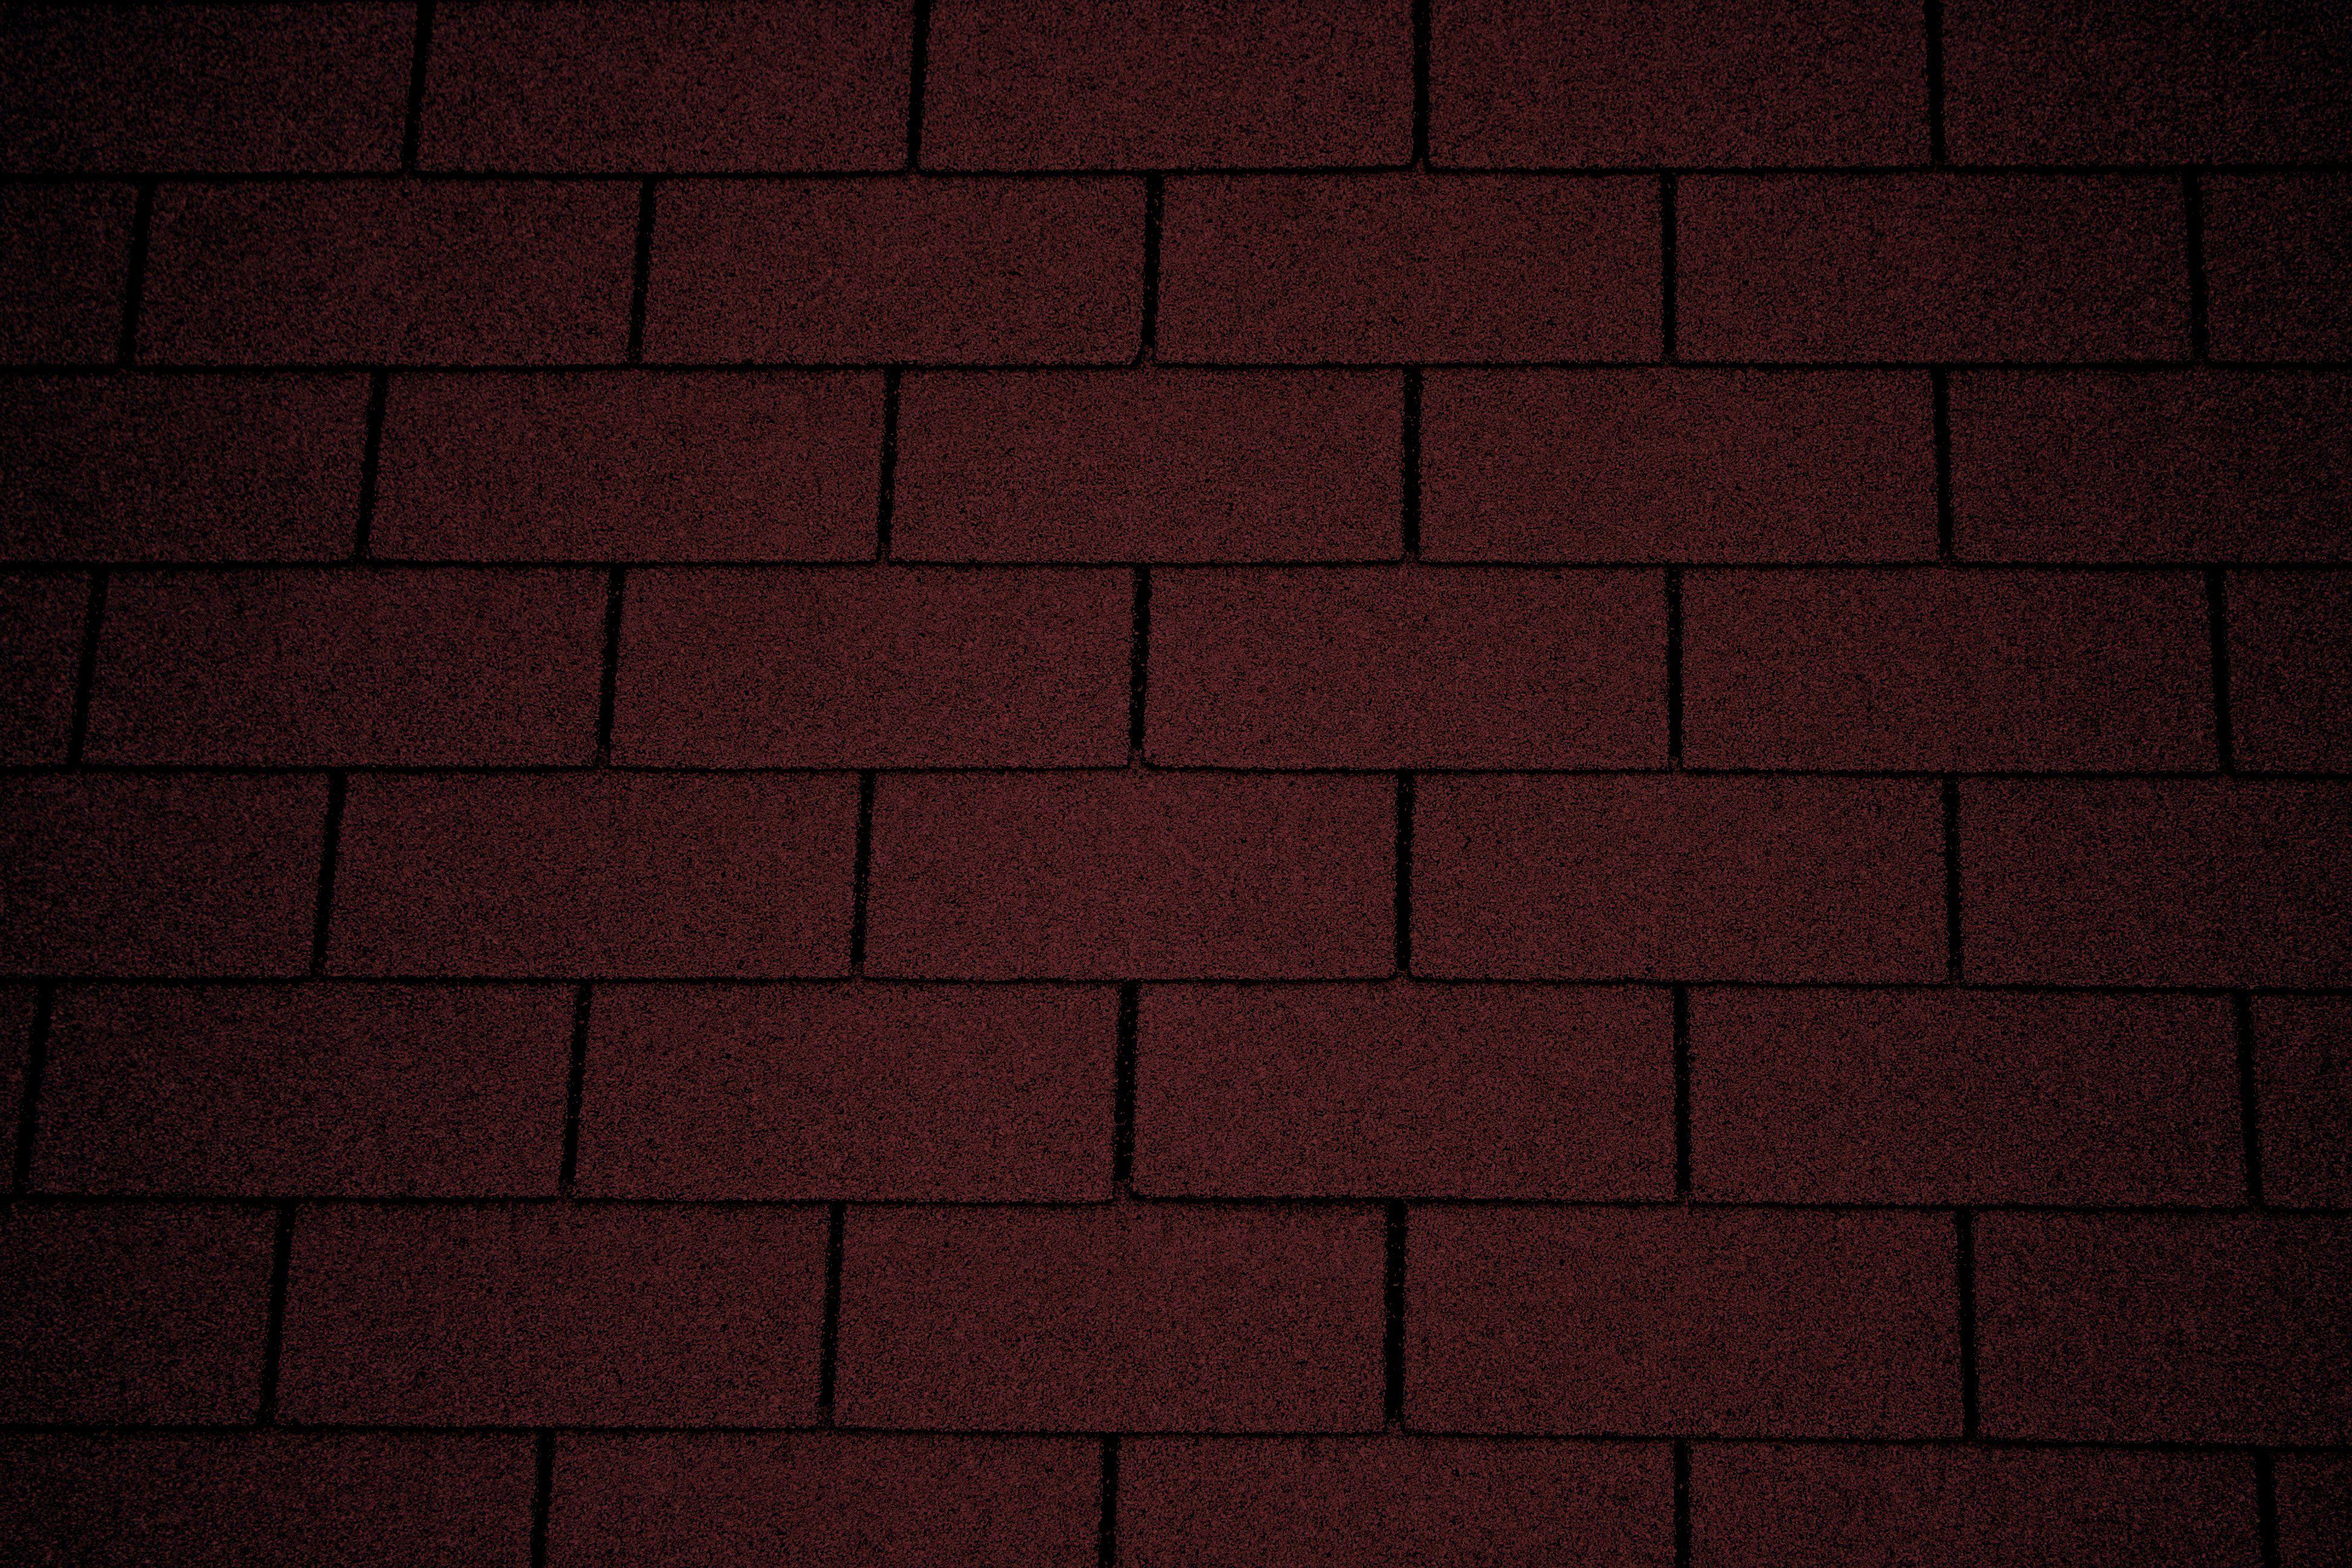 Dark Red Asphalt Roof Shingles Texture Picture. Free Photograph